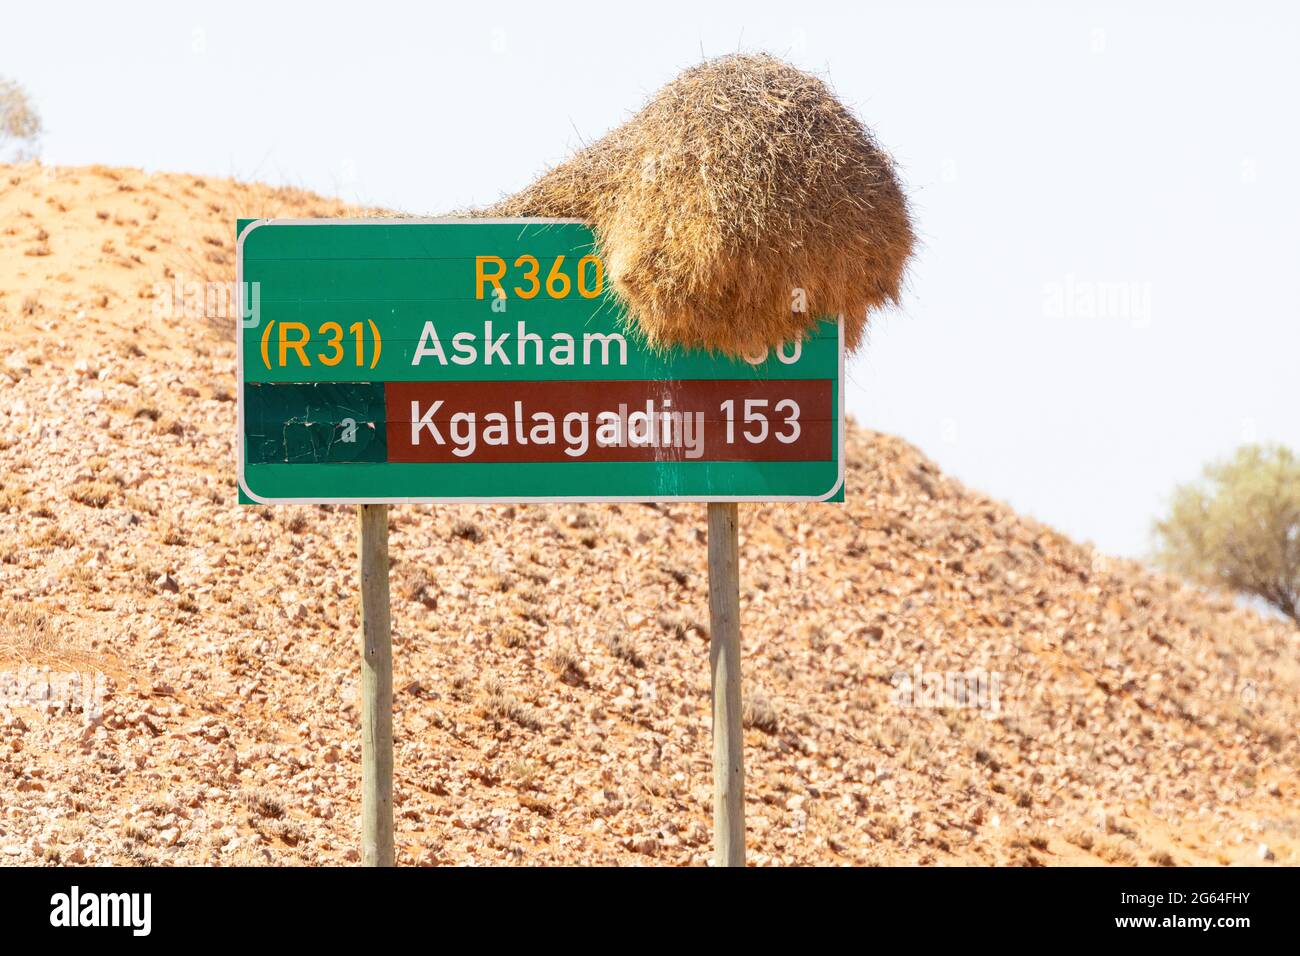 Large communal nest of the Sociable Weaver (Philetairus socius) on the signboard for the Kgalagadi and Askham,  Kalahari, Northern Cape, South Africa Stock Photo